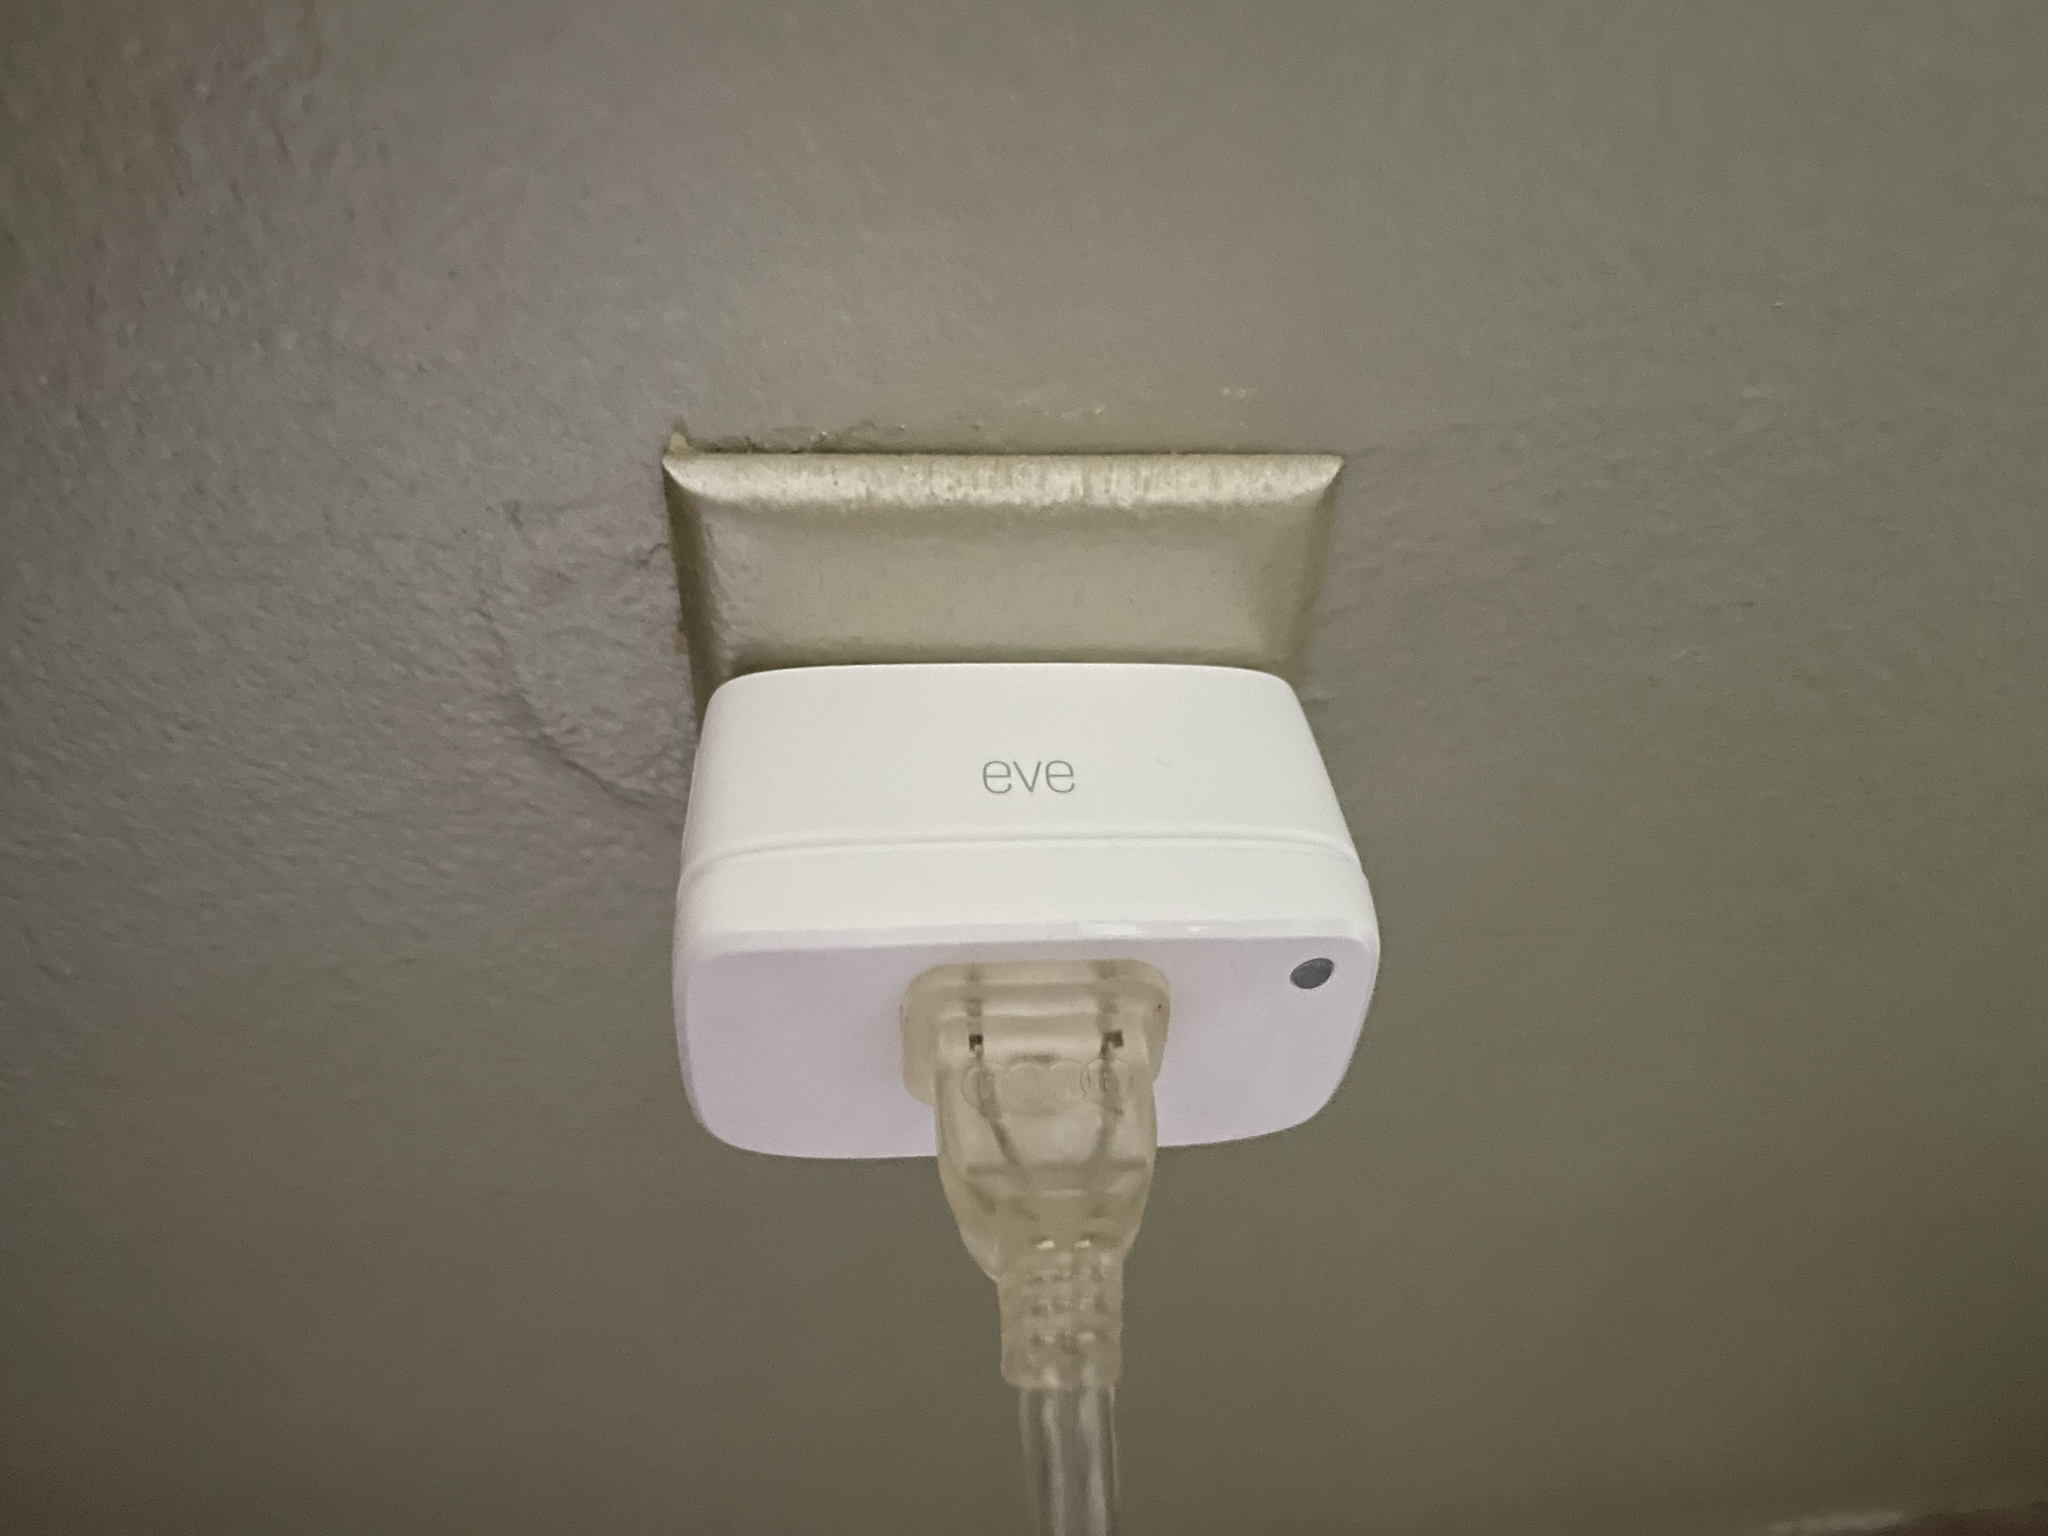 Eve Energy Smart Plug And Power Meter Lifestyle Plugged In Off